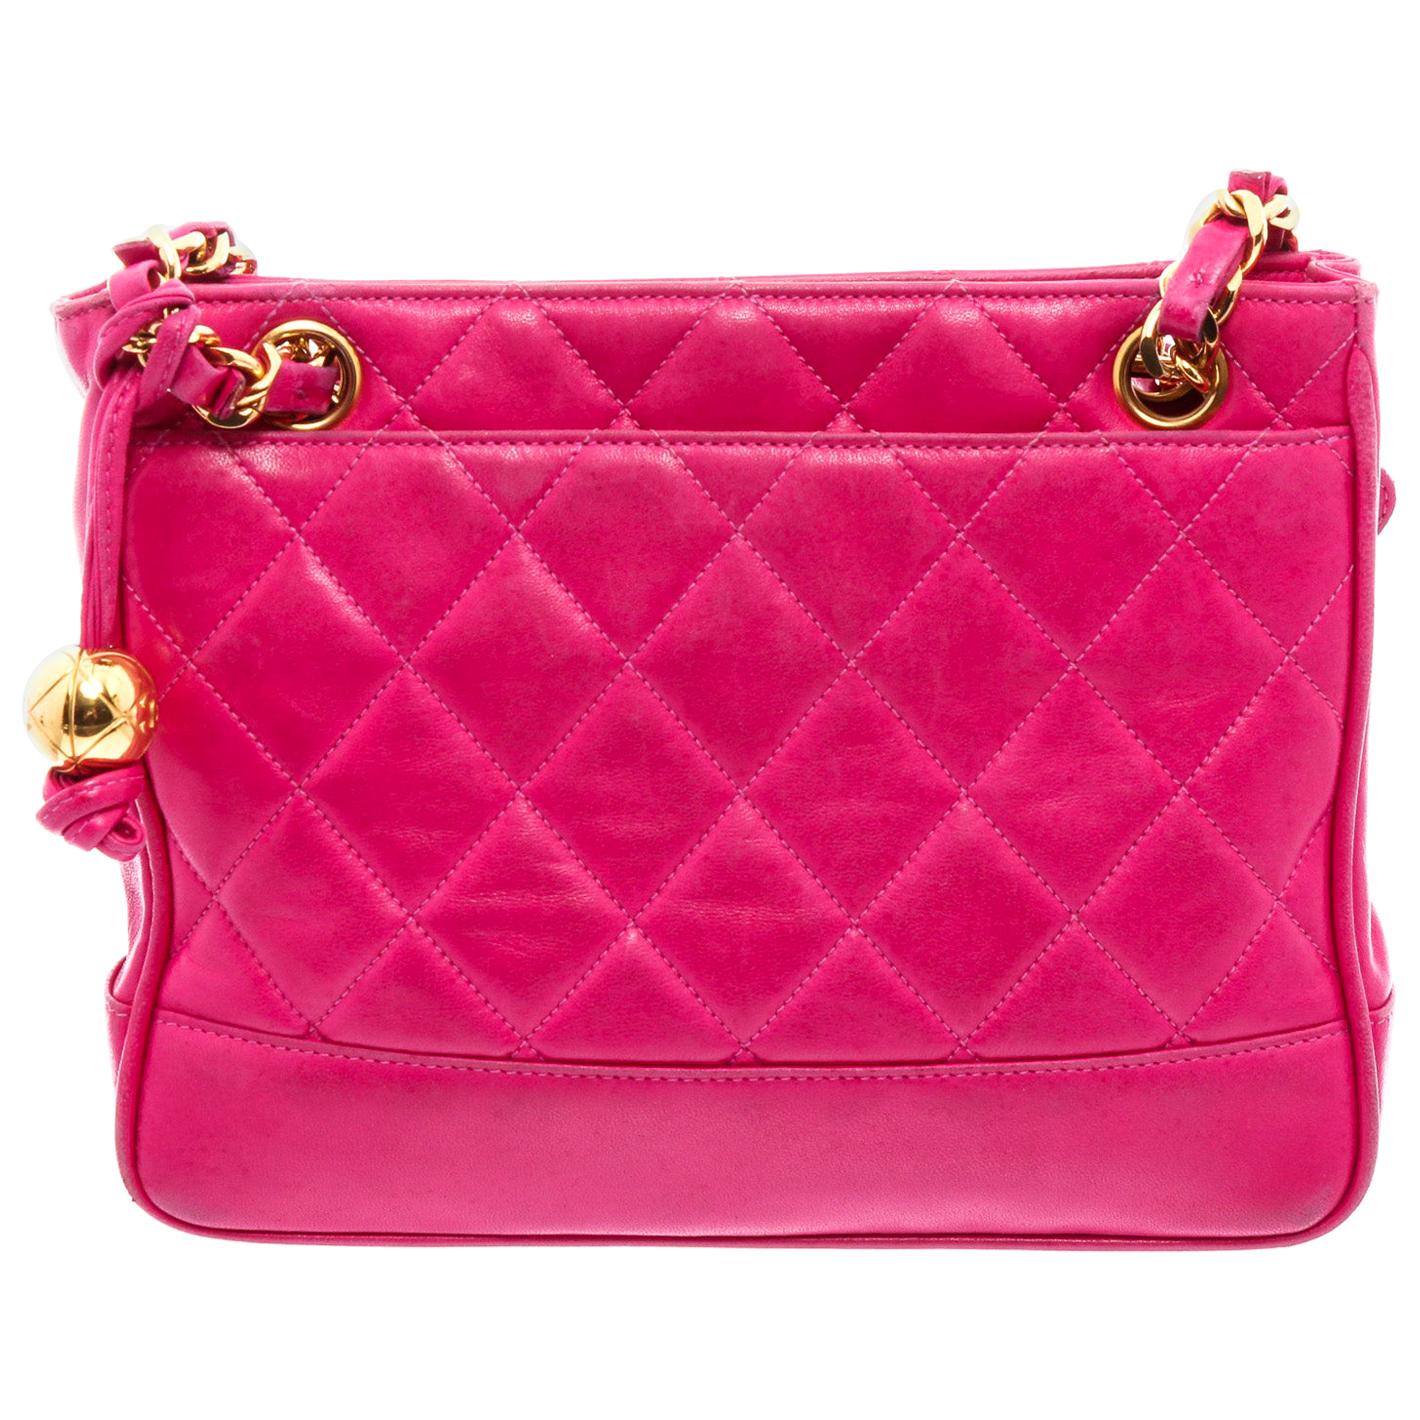 Chanel Vintage Pink Quilted Leather Tote Bag